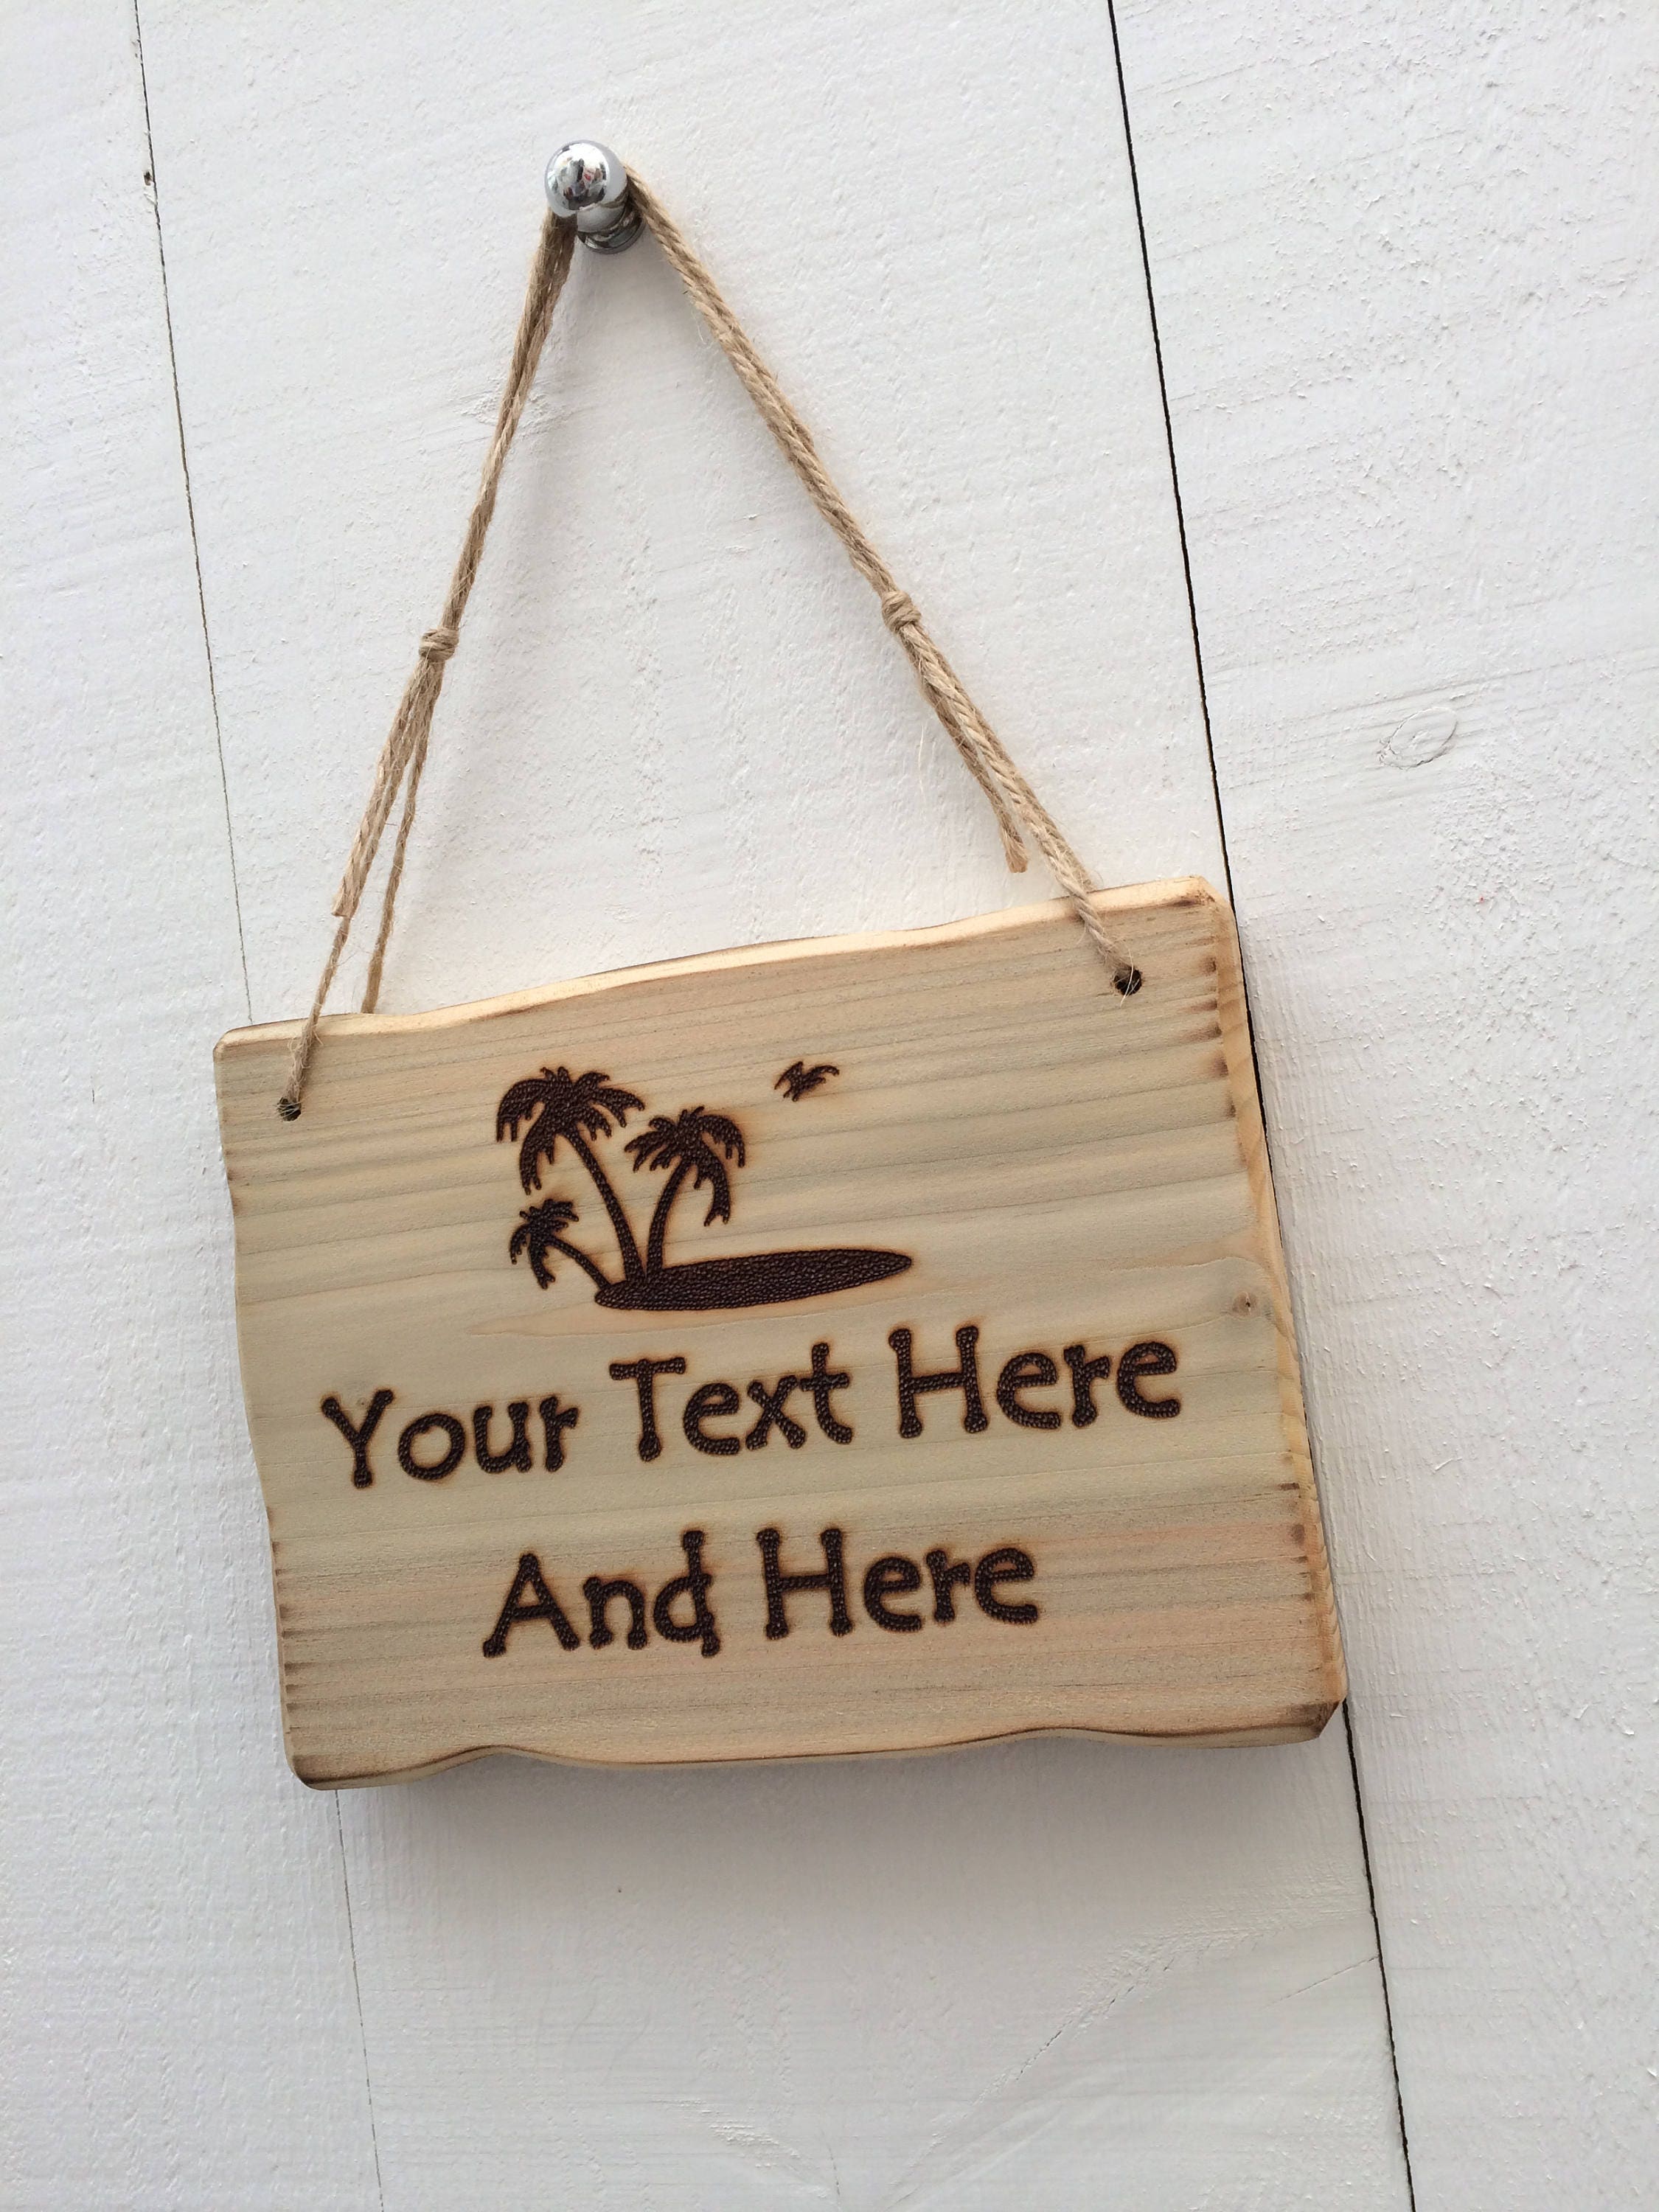 Handmade Personalised Rustic Wooden Design Your Own Sign Plaque 20cm x 10cm 3pc 